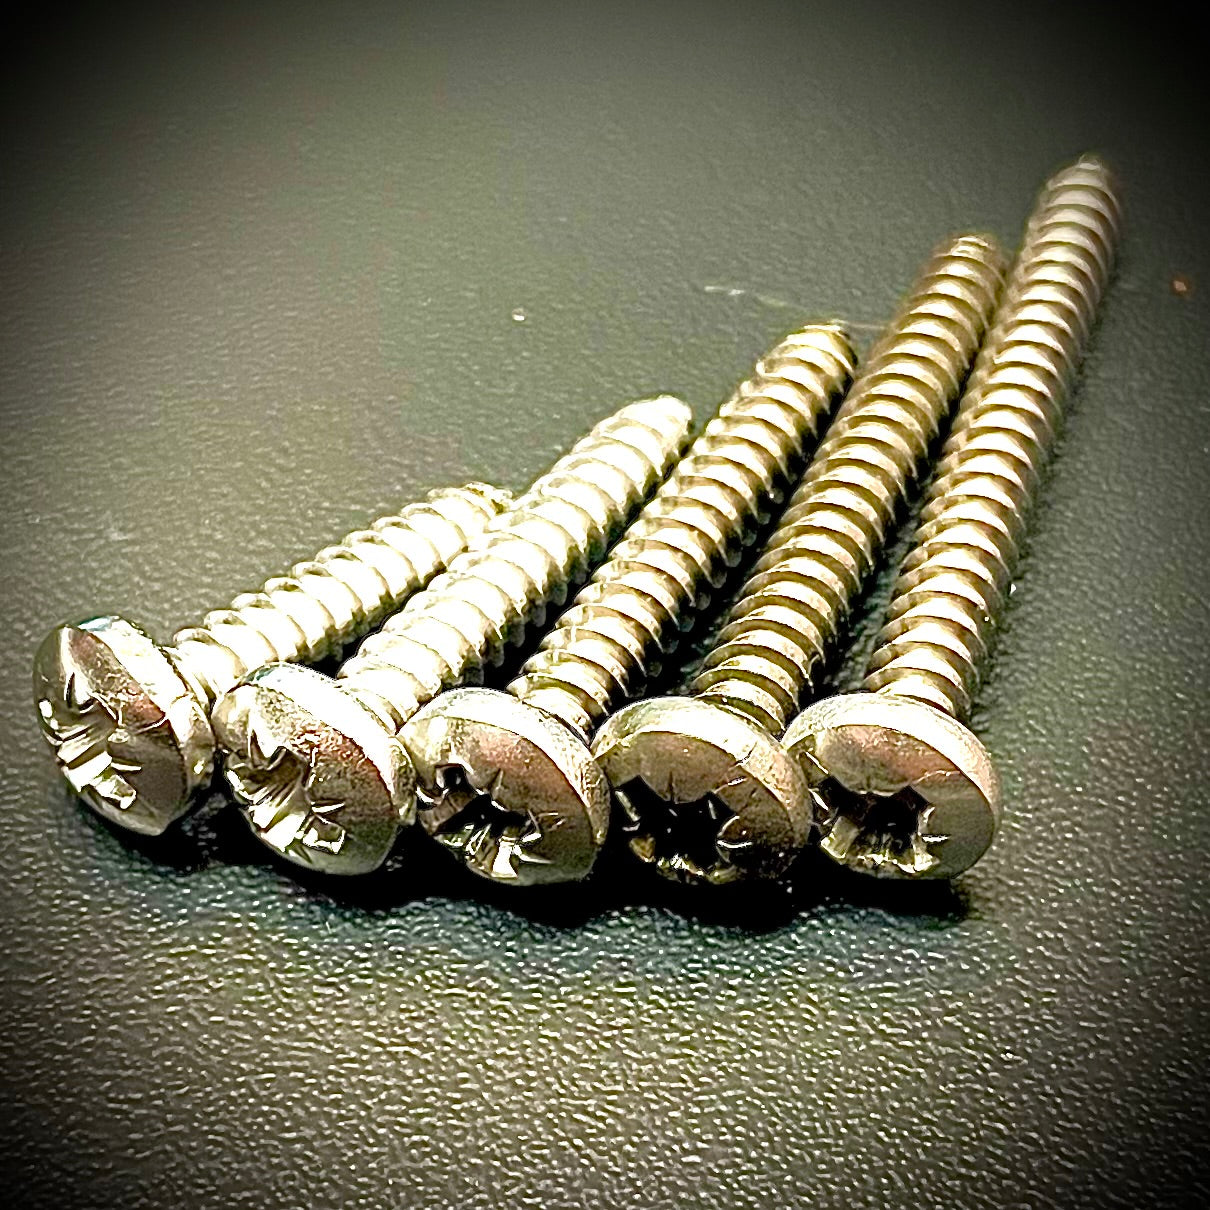 No 8 4.2mm Pozi Pan Self Tapping Screws AB Point A2 304 Stainless - Fixaball Ltd. Fixings and Fasteners UK